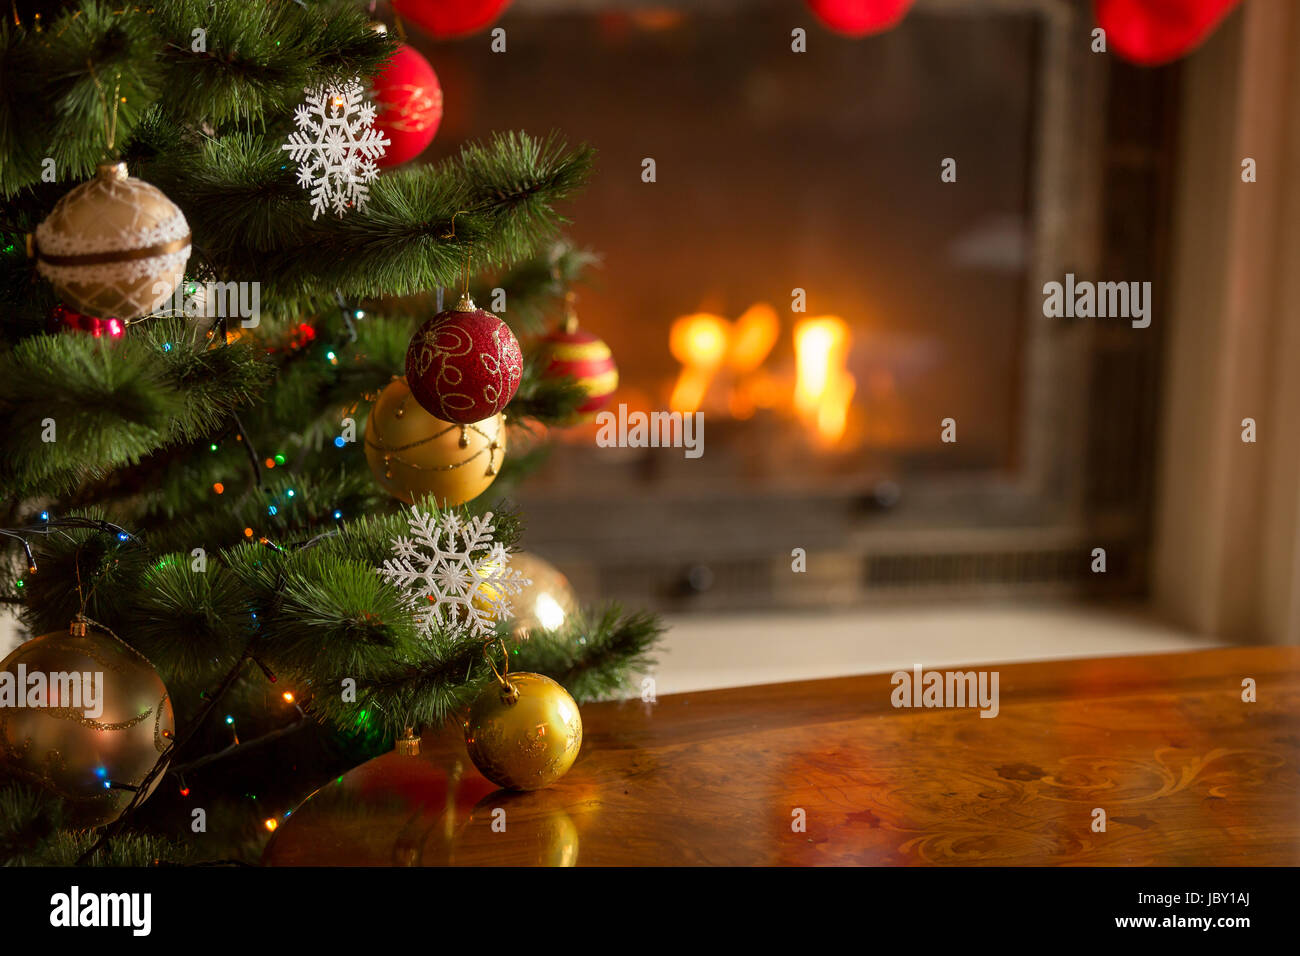 Closeup image of golden and red baubles on Christmas tree in front of burning fireplace. Beautiful Christmas background Stock Photo